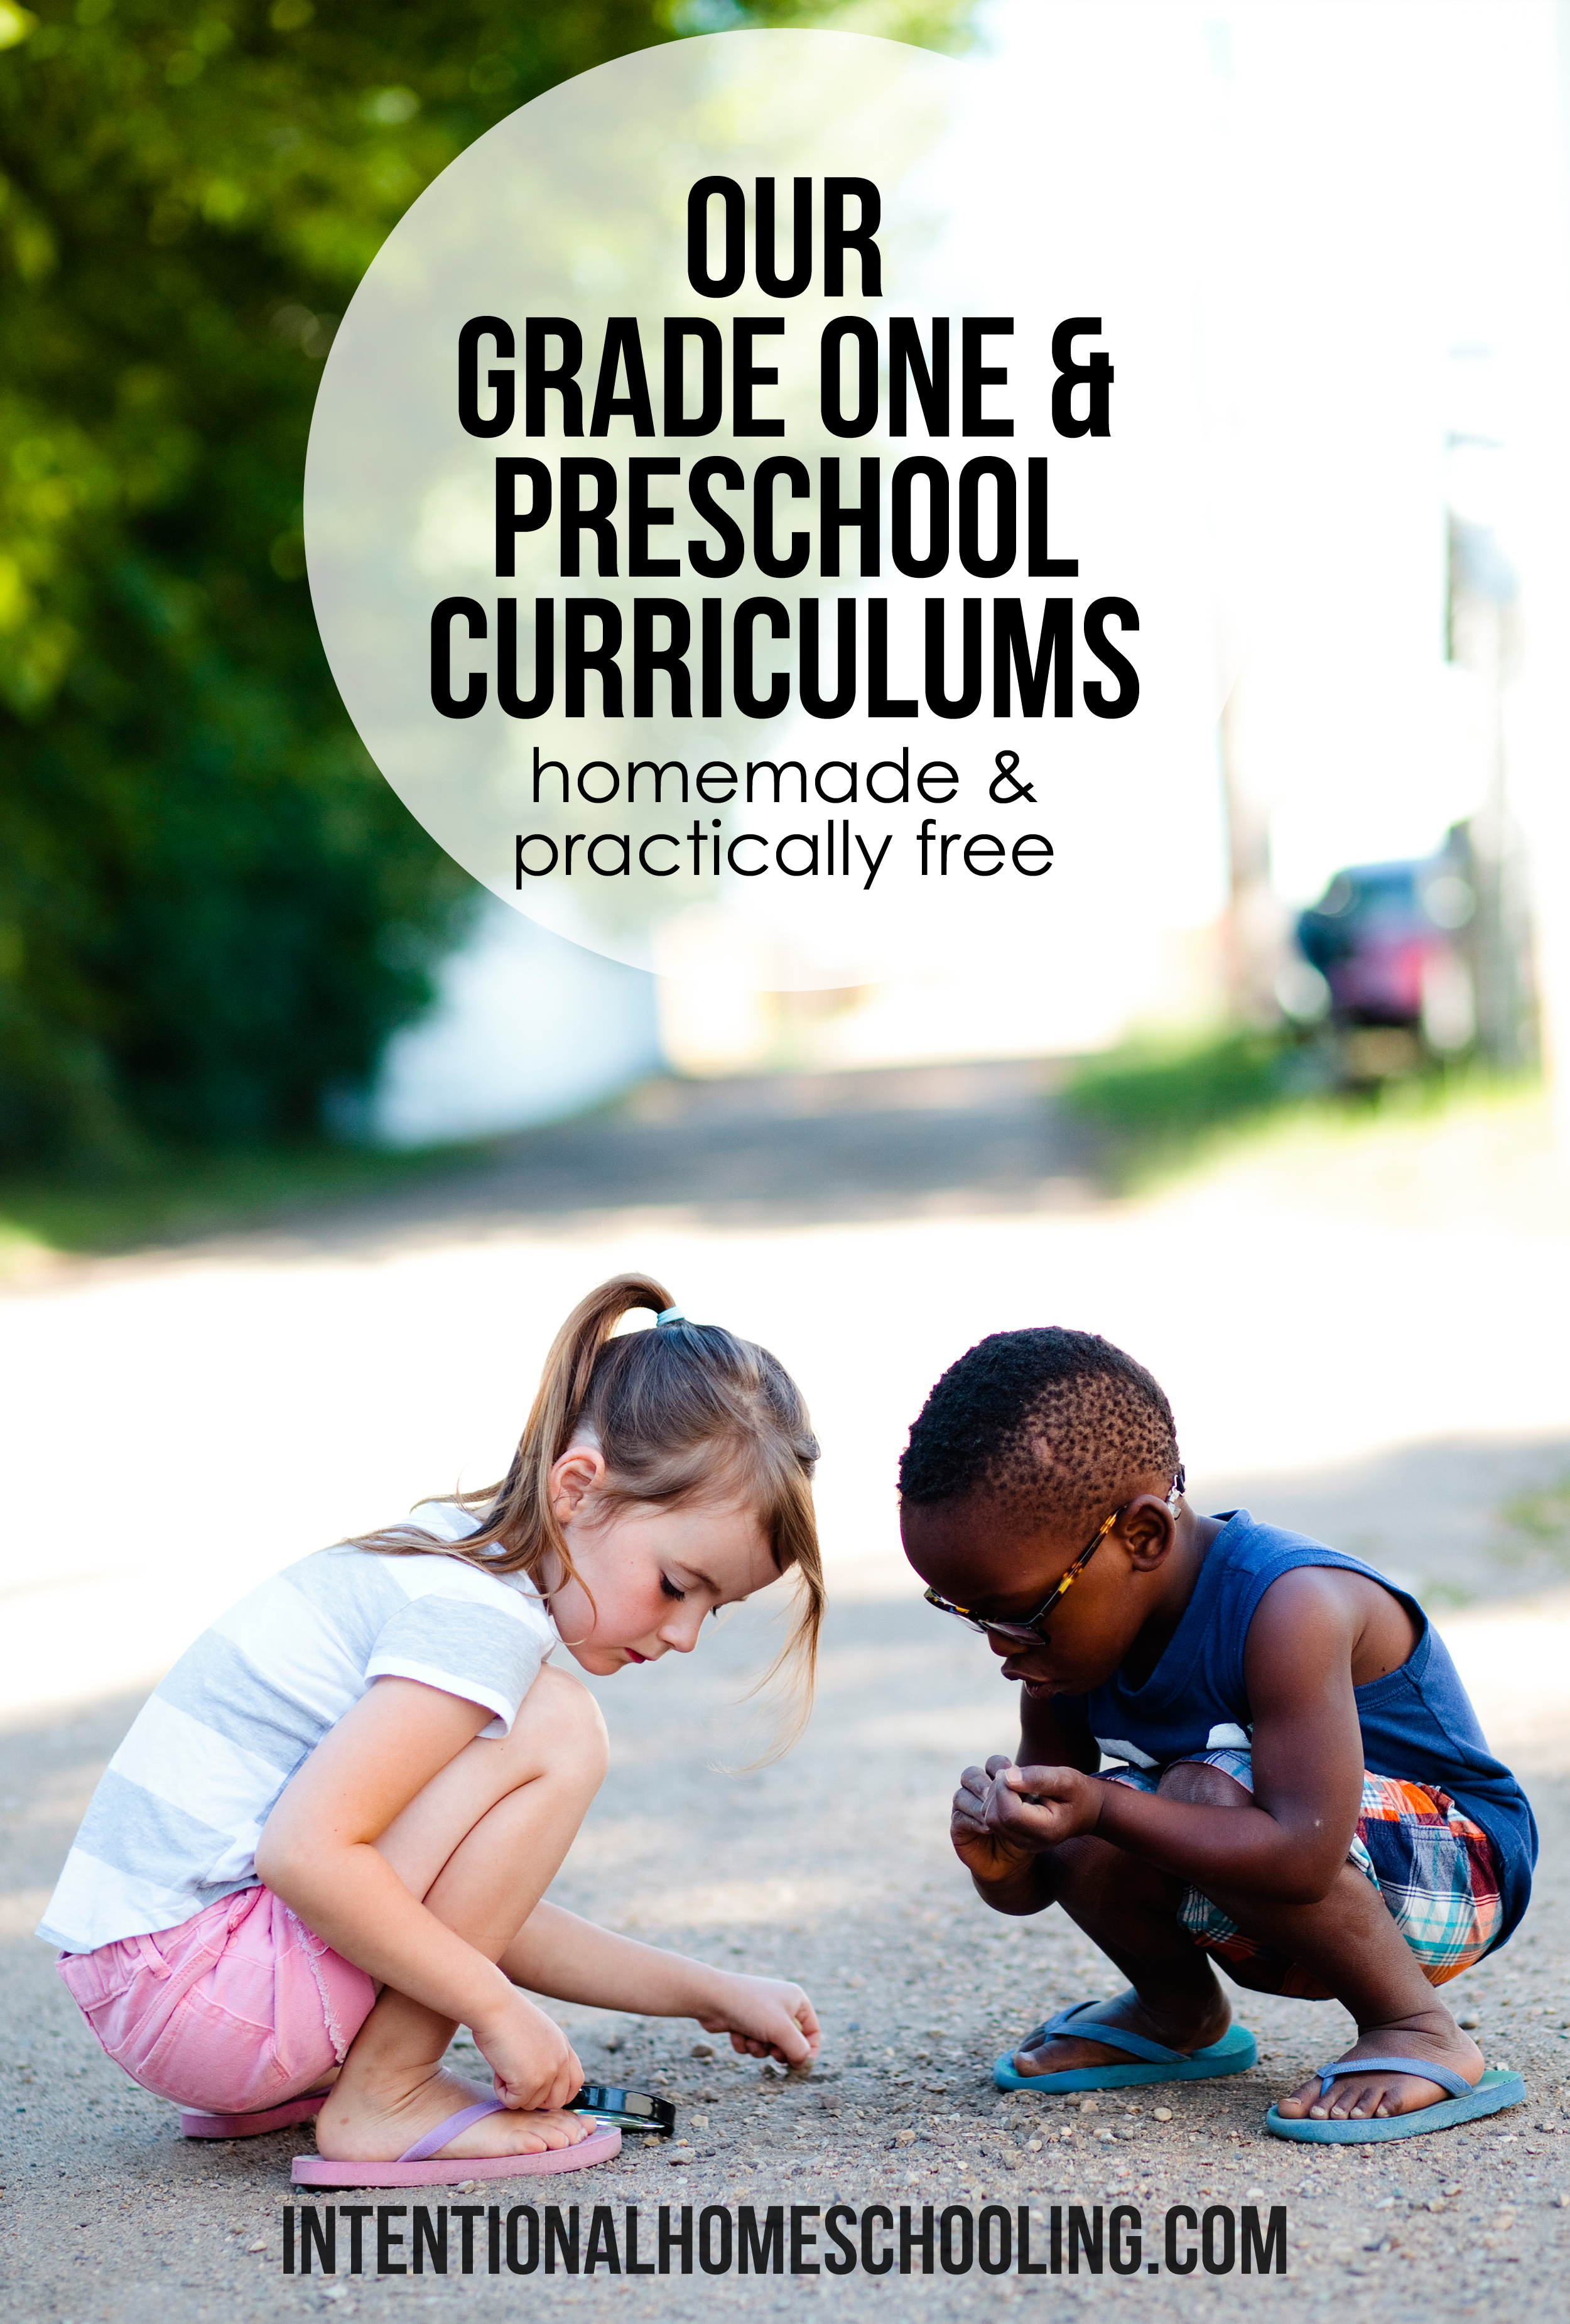 Our curriculum plans for homeschooling grade one and preschool.